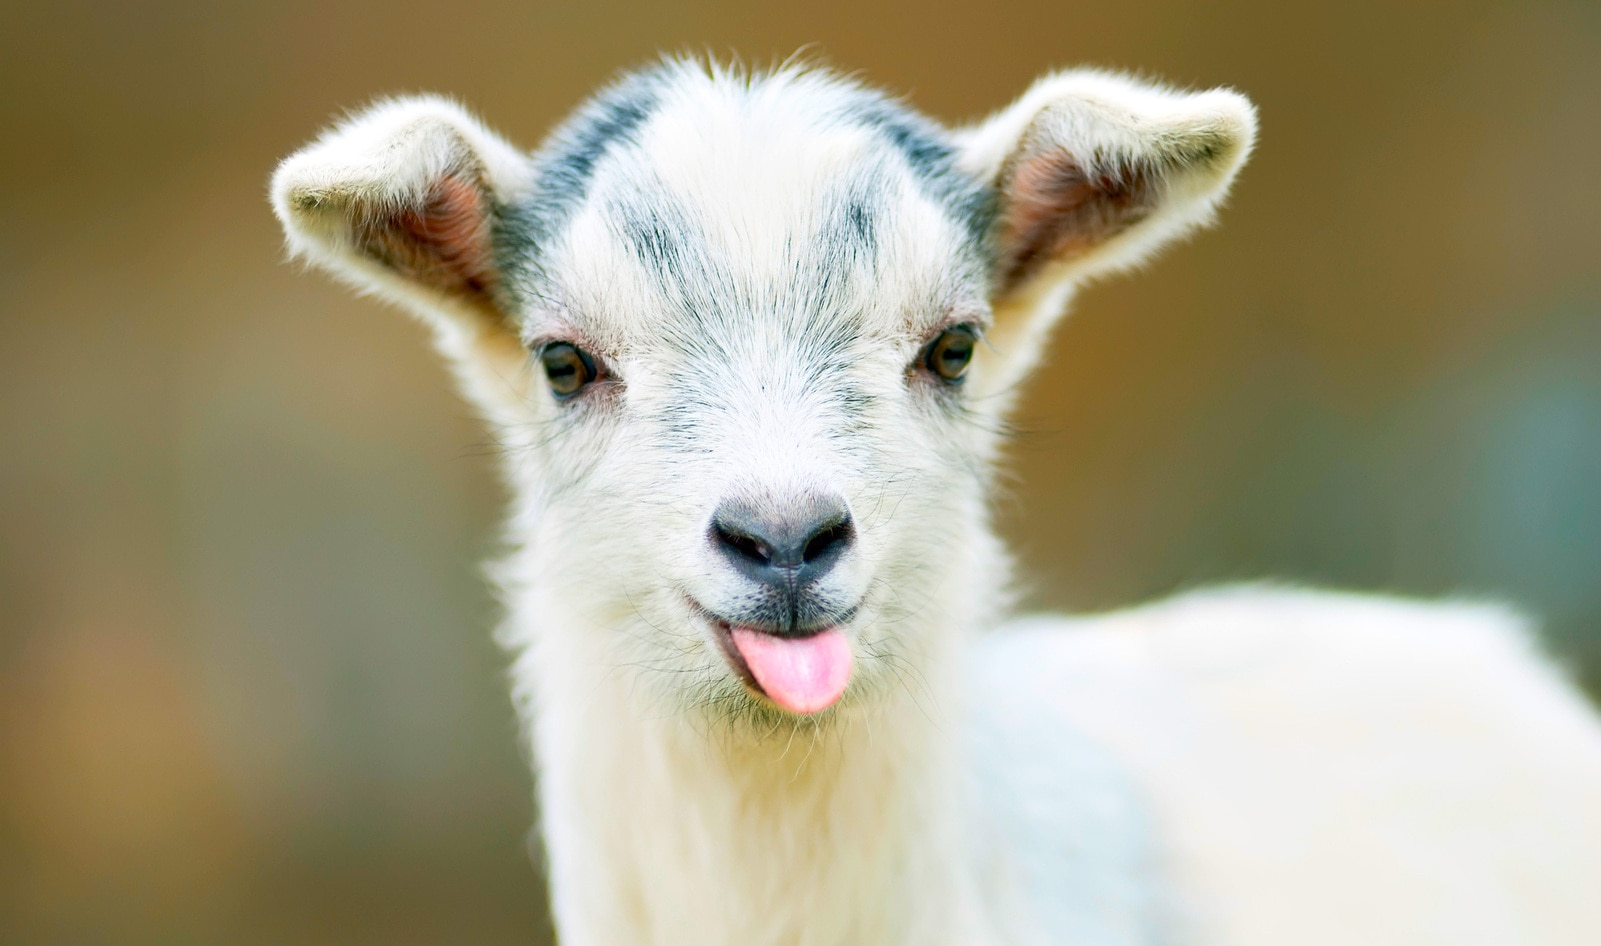 New Study Finds Goats Respond to Human Cues the Same Way Dogs Do | VegNews